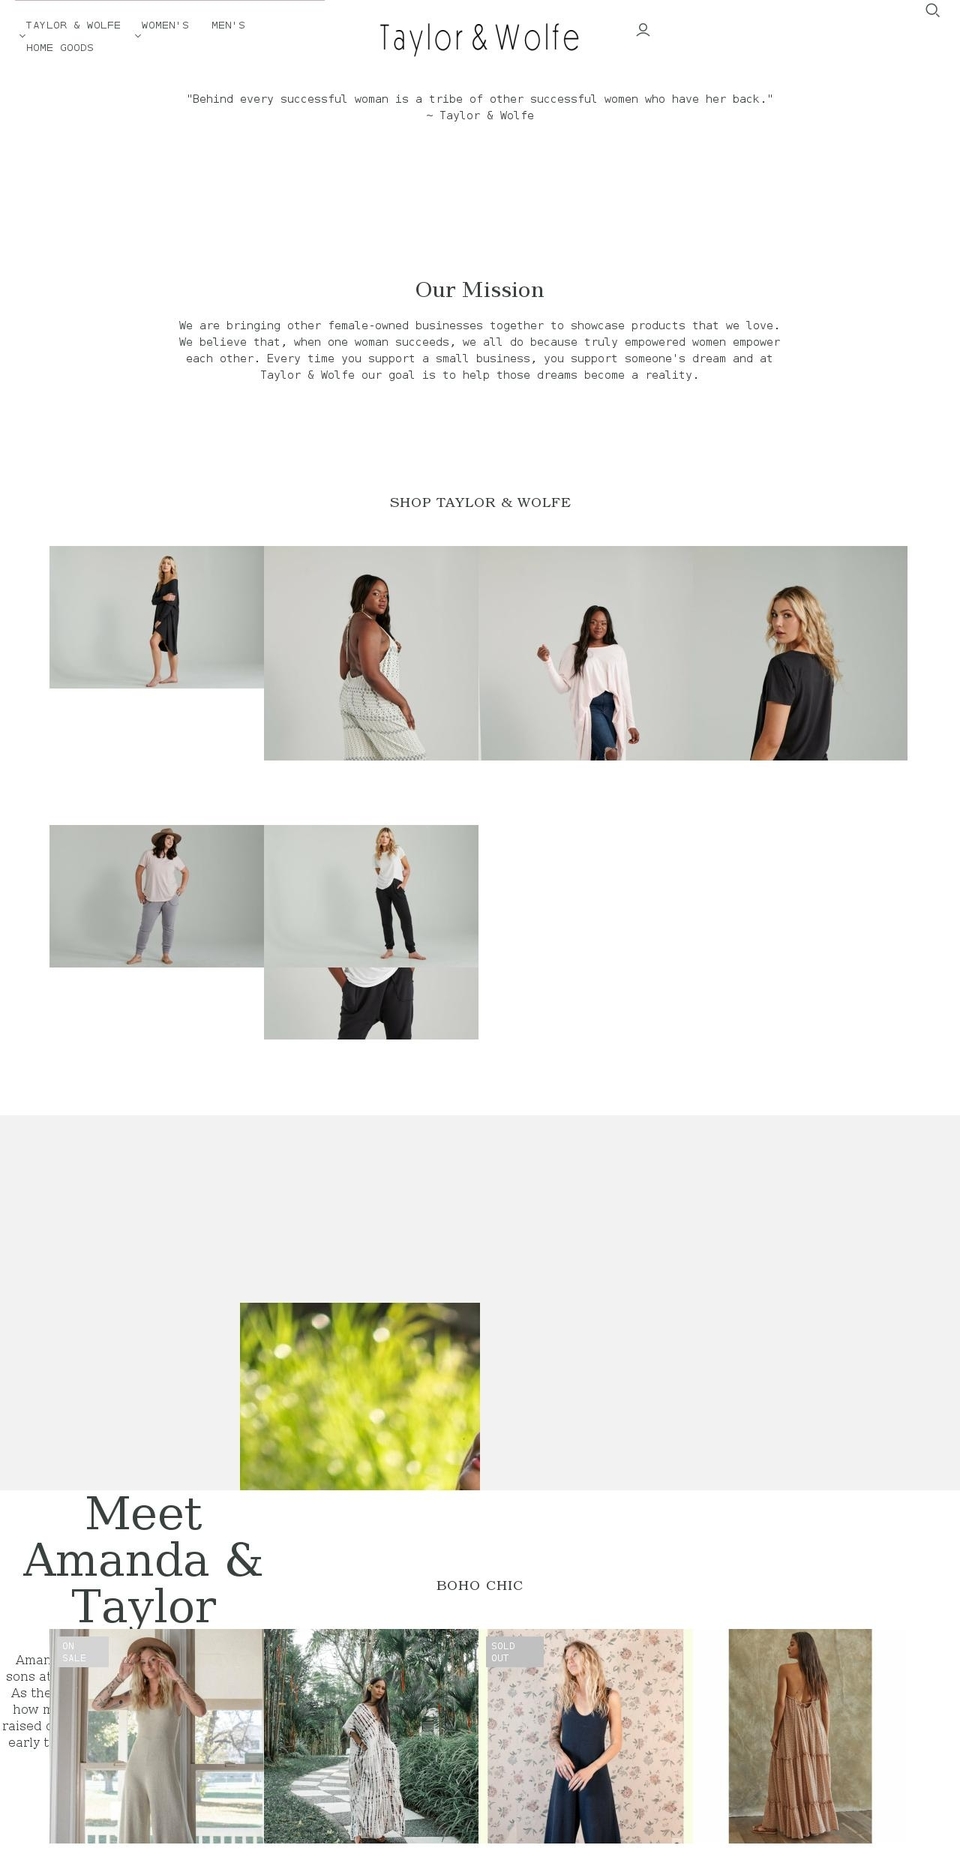 Taylor Shopify theme site example taylorandwolfe.com